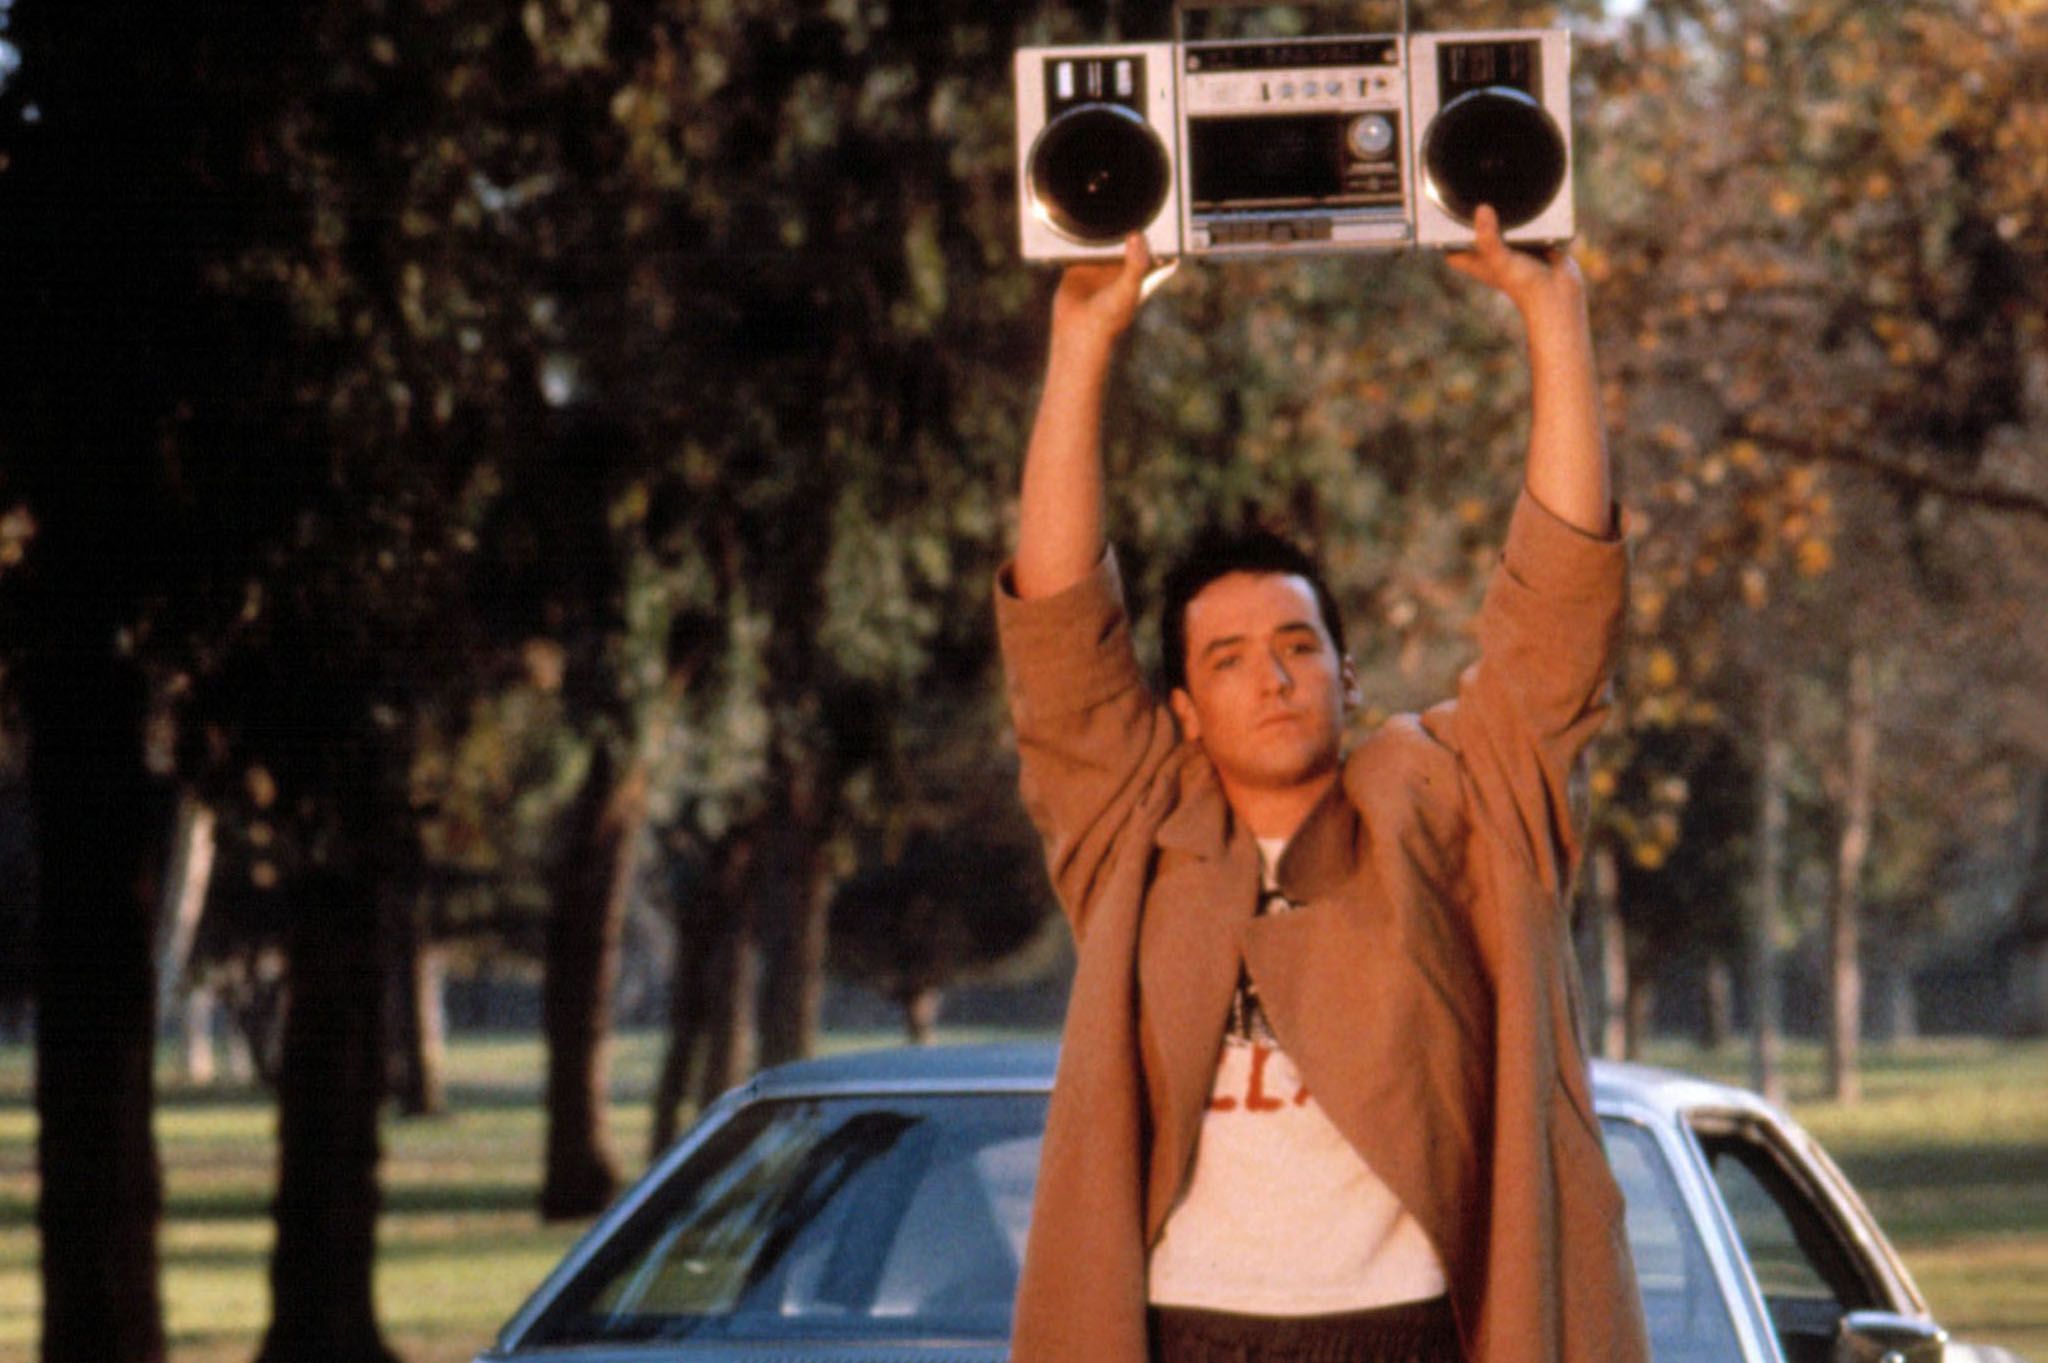 What 1980s Stereotype Are You? 1980s boombox